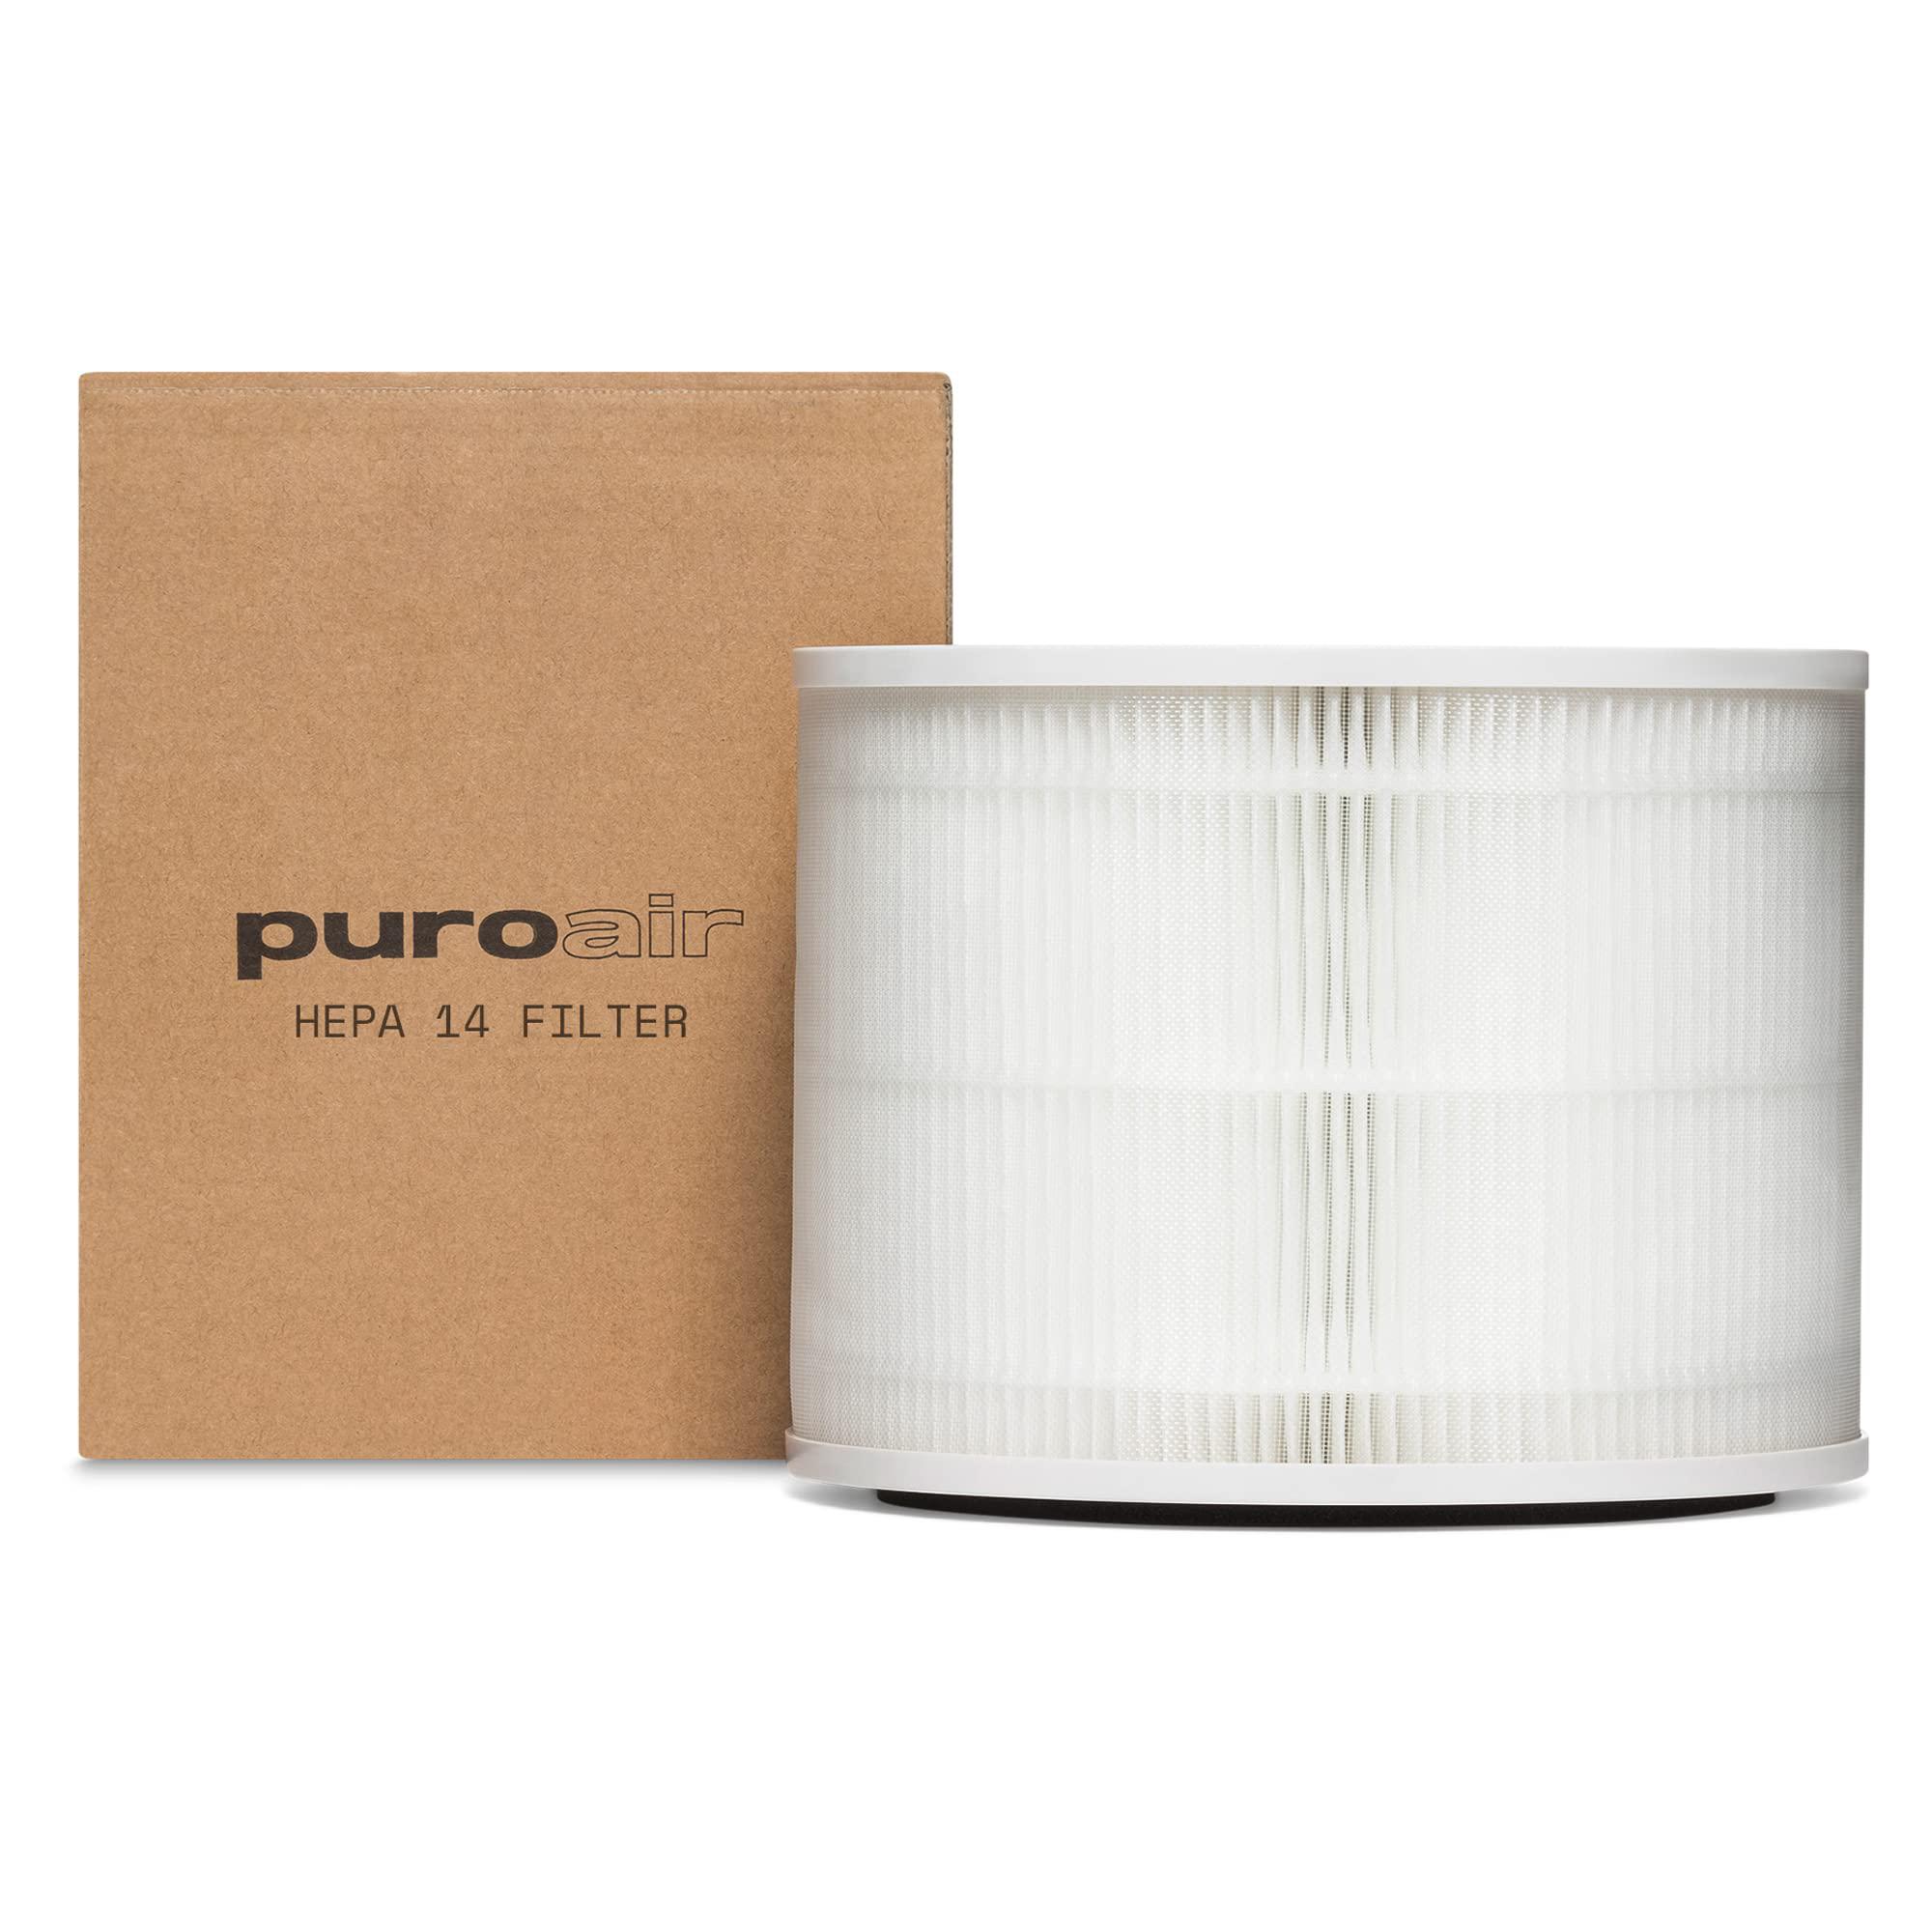 Elevate Your Home puroair air purifier replacement filter hepa 14 - genuine replacement hepa 14 filter for puroair purifier - captures 99.99% o